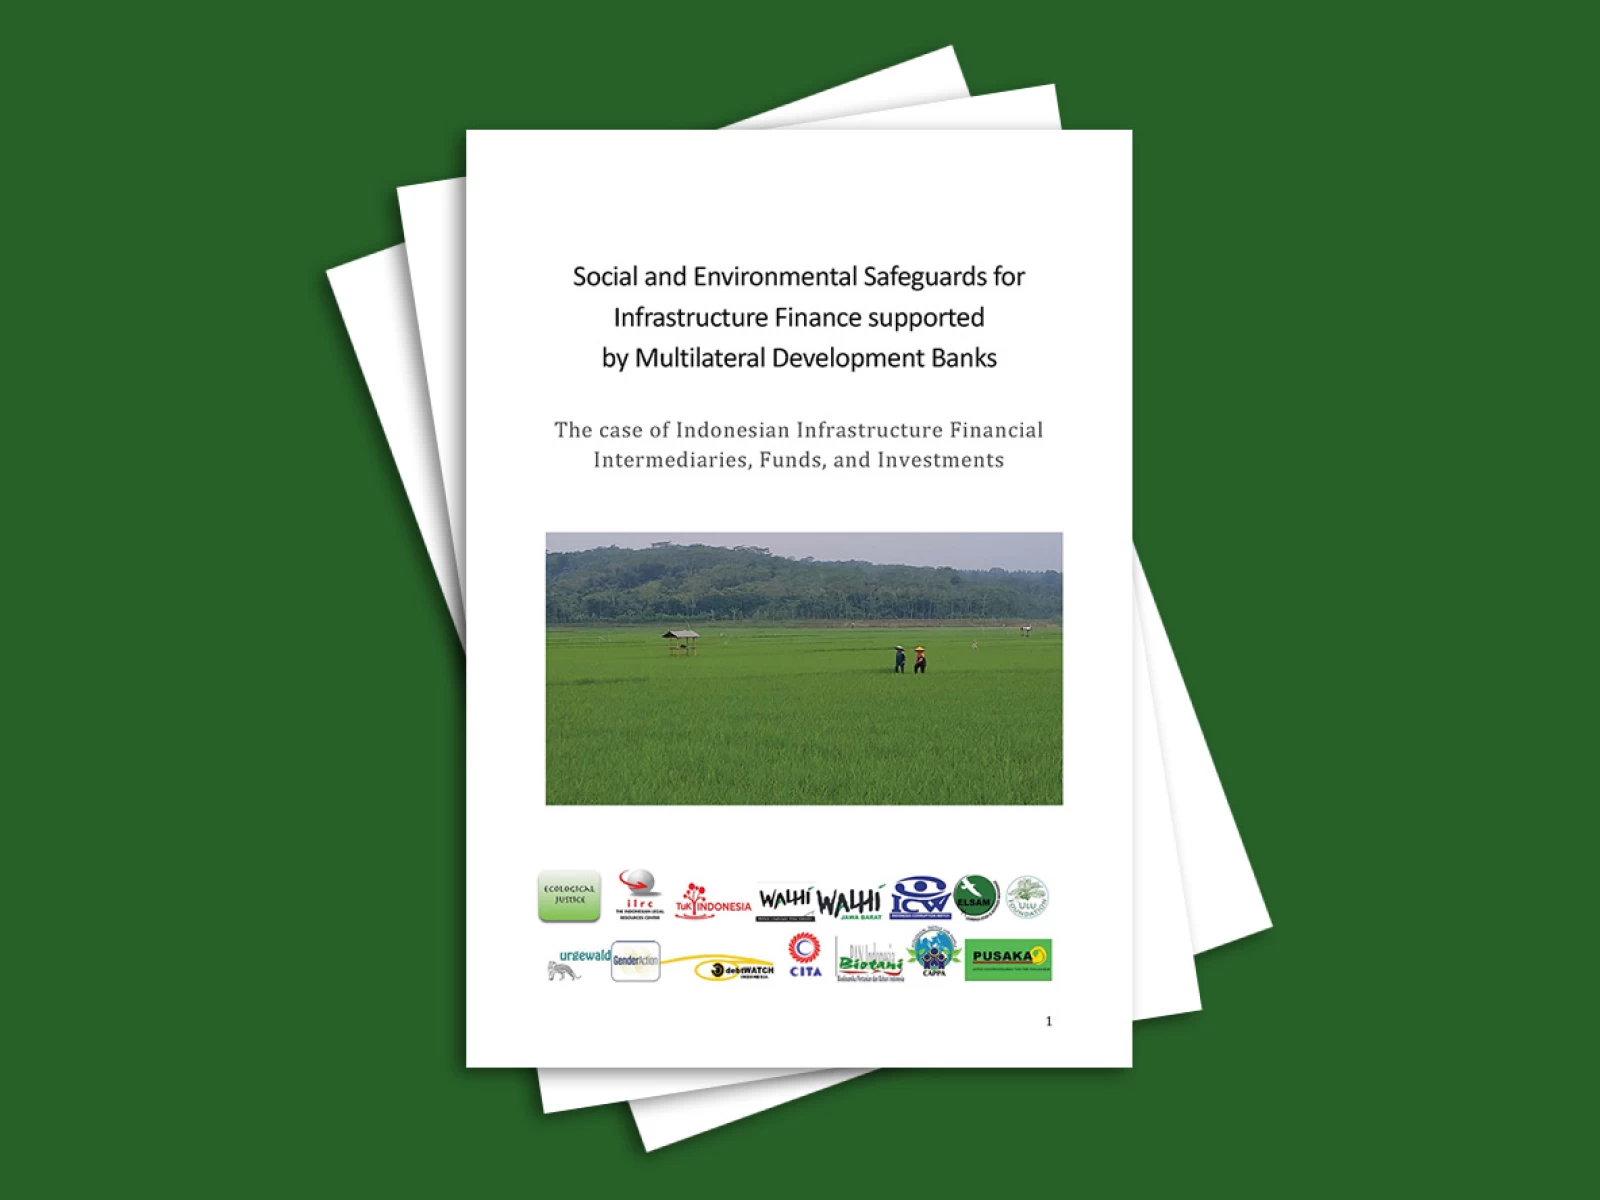 Social And Environmental Safeguards For Infrastructure Finance Supported By Multilateral Development Banks: The Case Of Indonesian Infrastructure Financial Intermediaries, Funds, And Investments